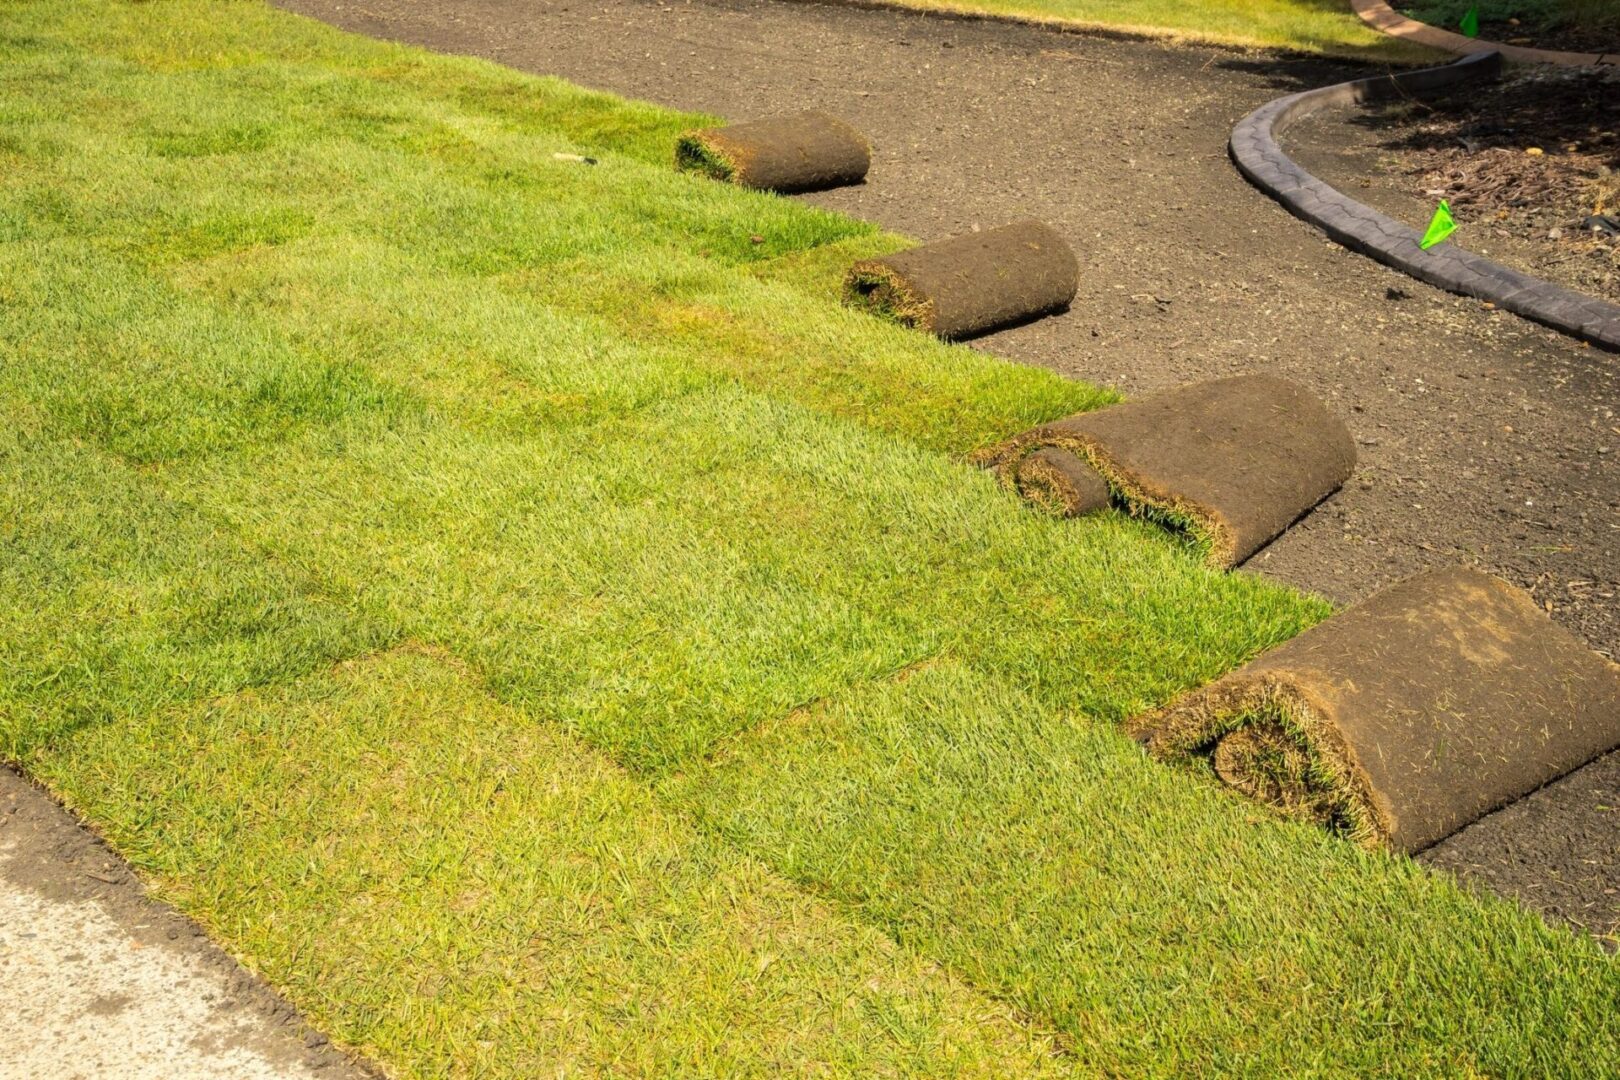 A close up of grass rolls laying on the ground